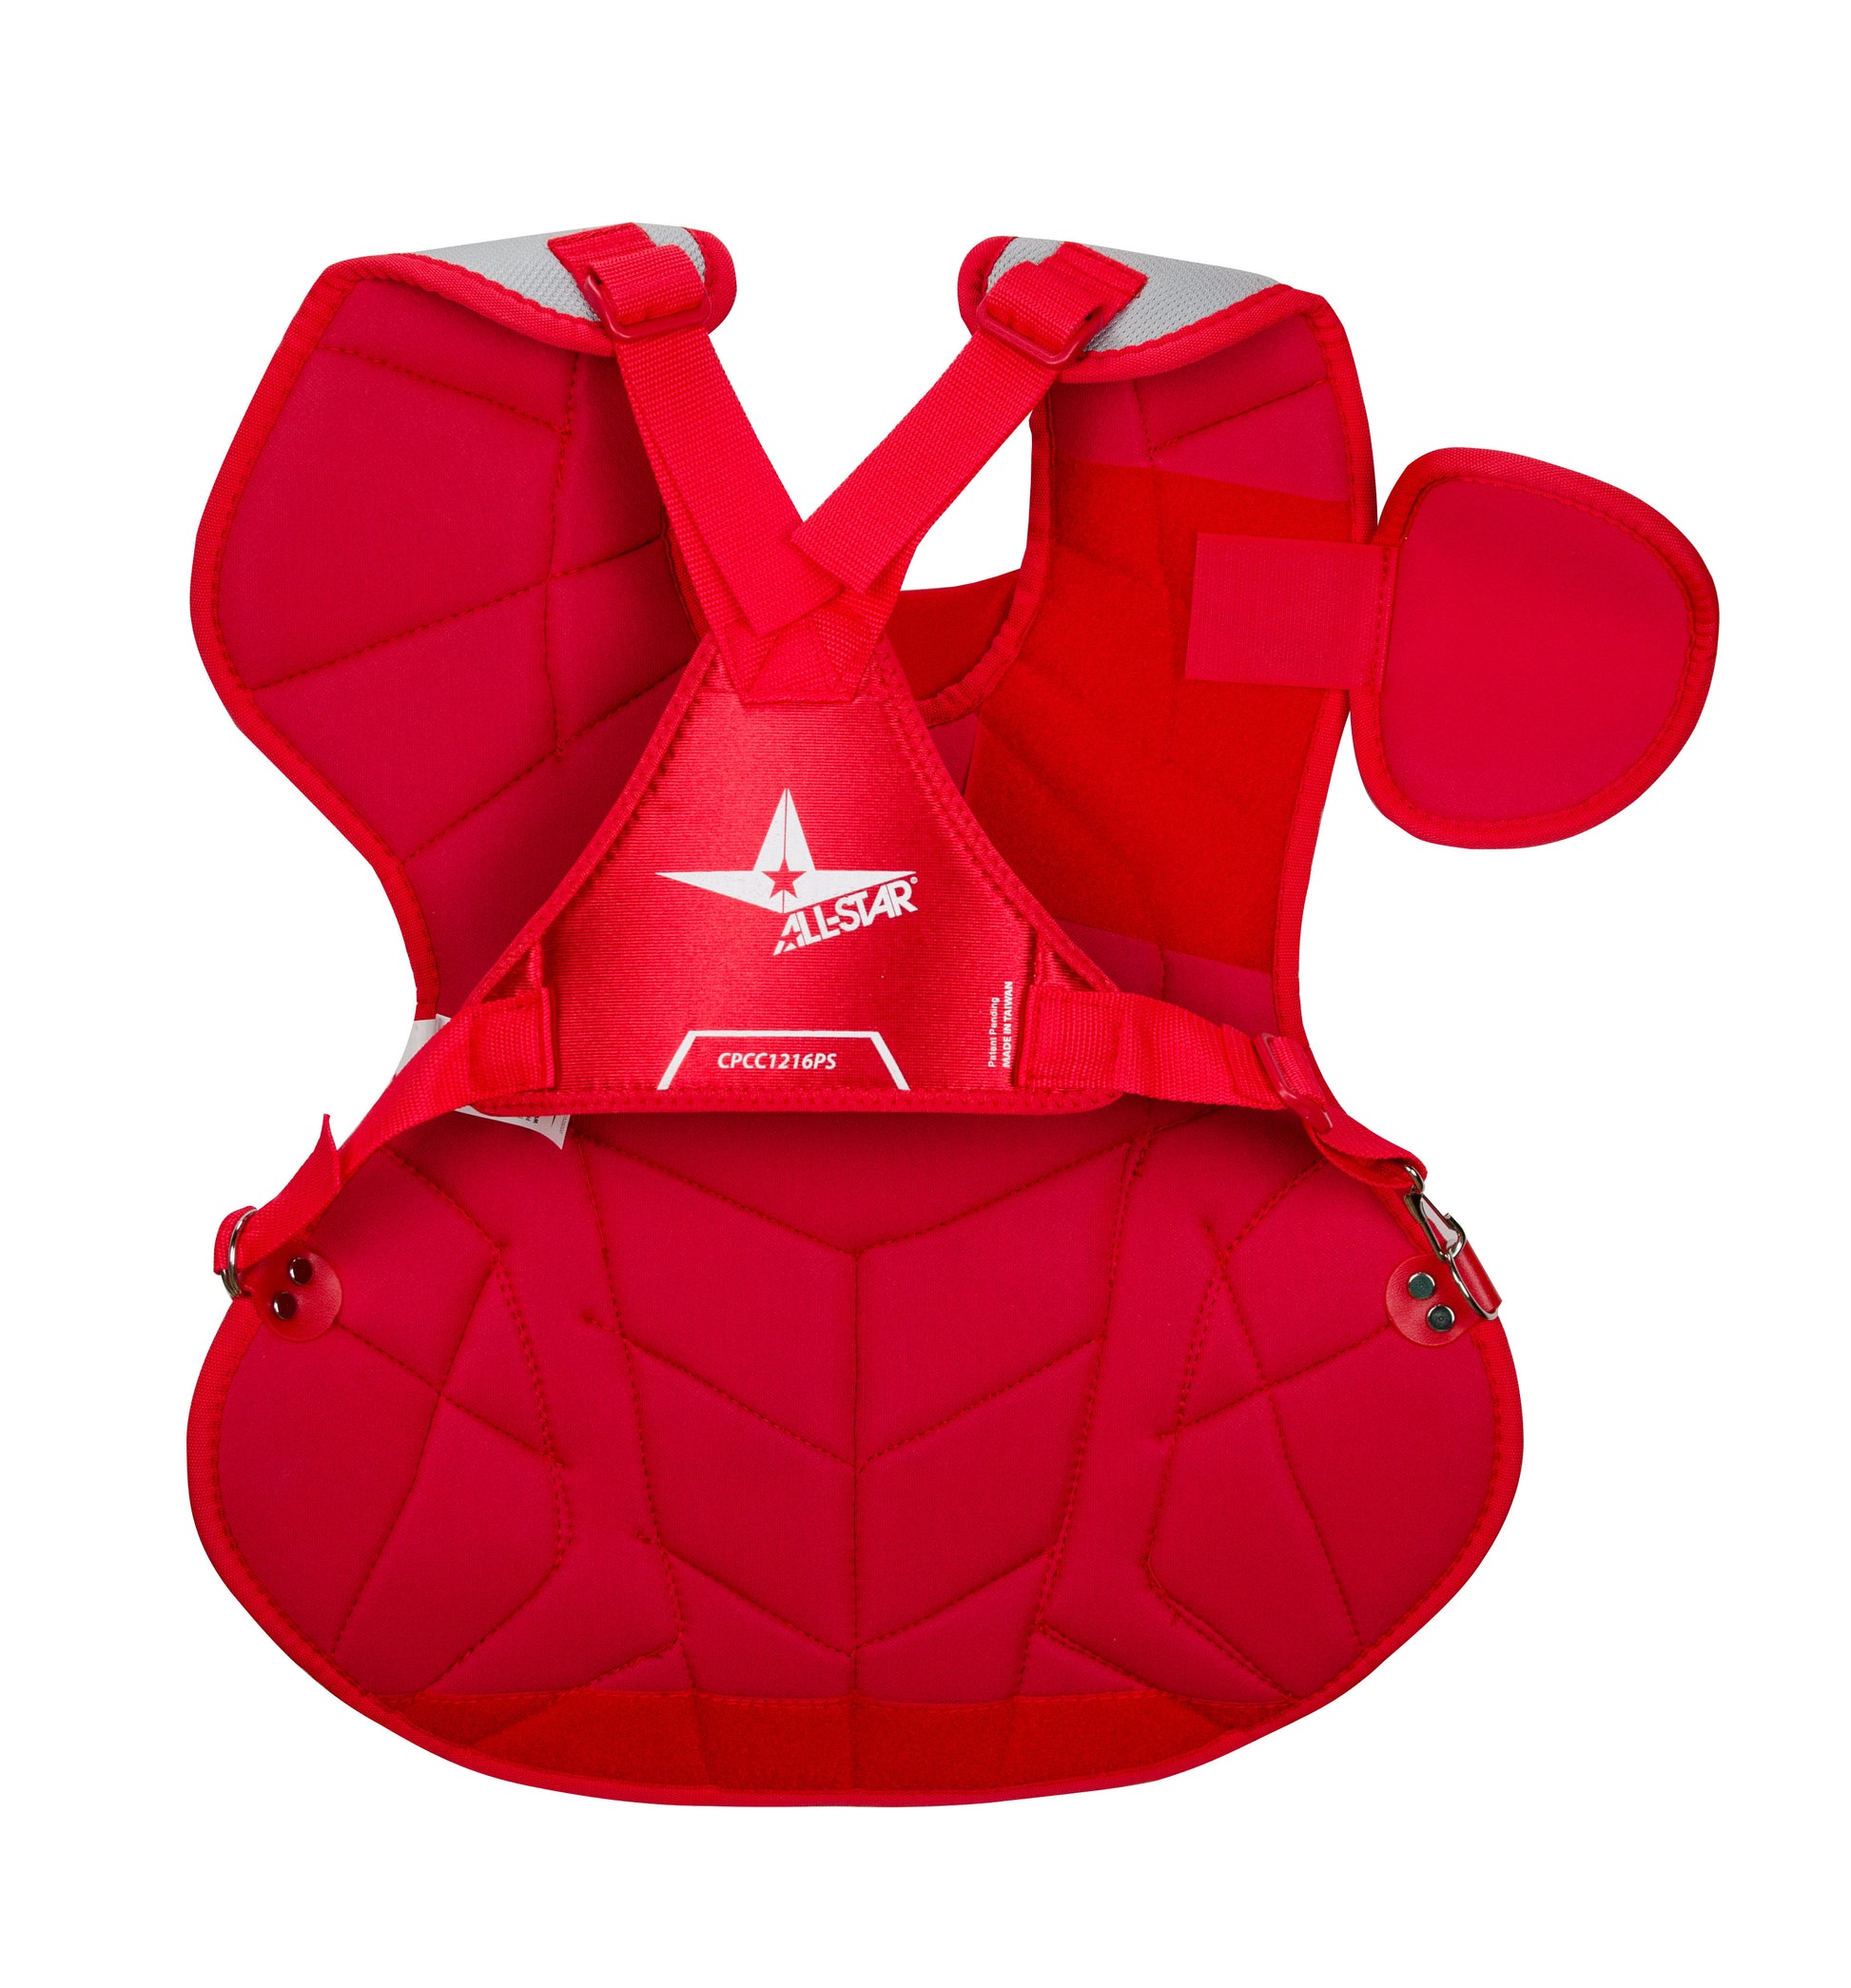 all-star-players-series-chest-protector-cpcc912ps